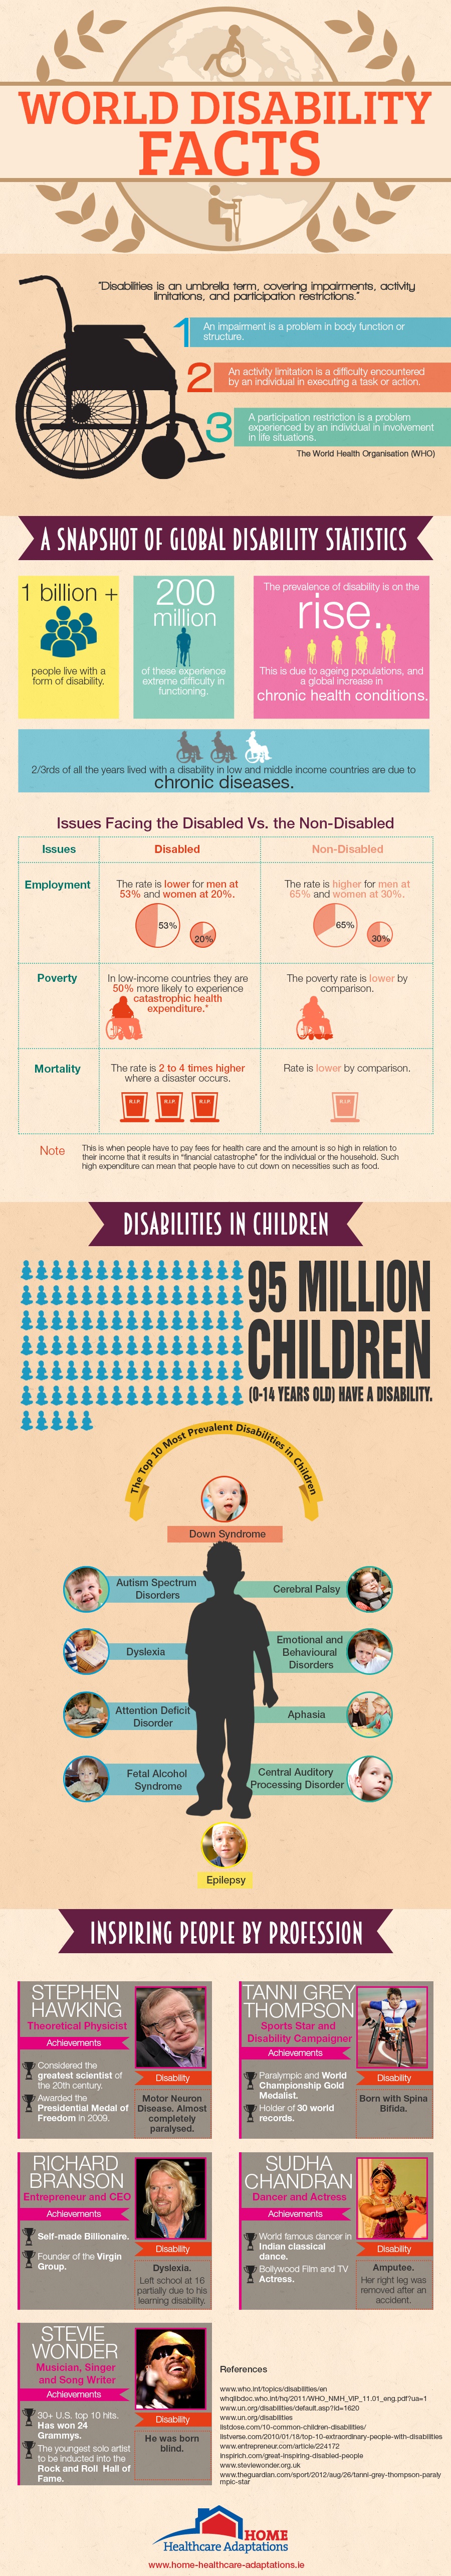 World Disability Facts 